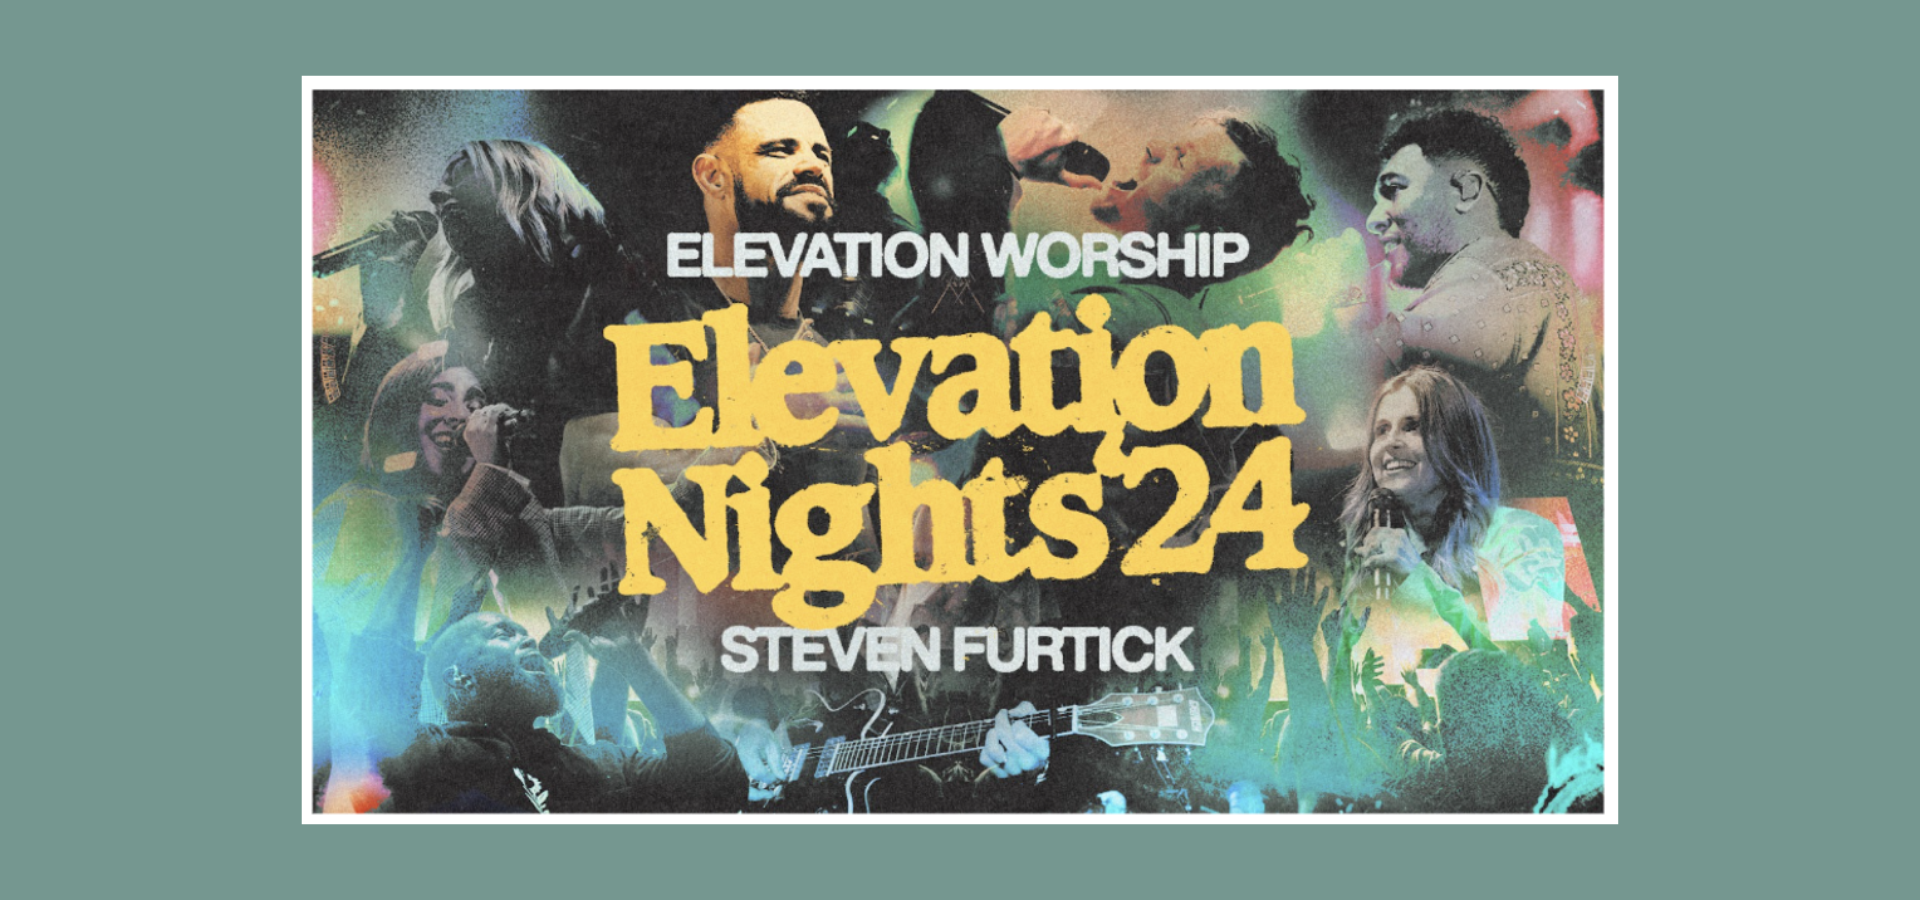 Elevation Nights '24 With Elevation Worship And Pastor Steven Furtick Returns This Fall